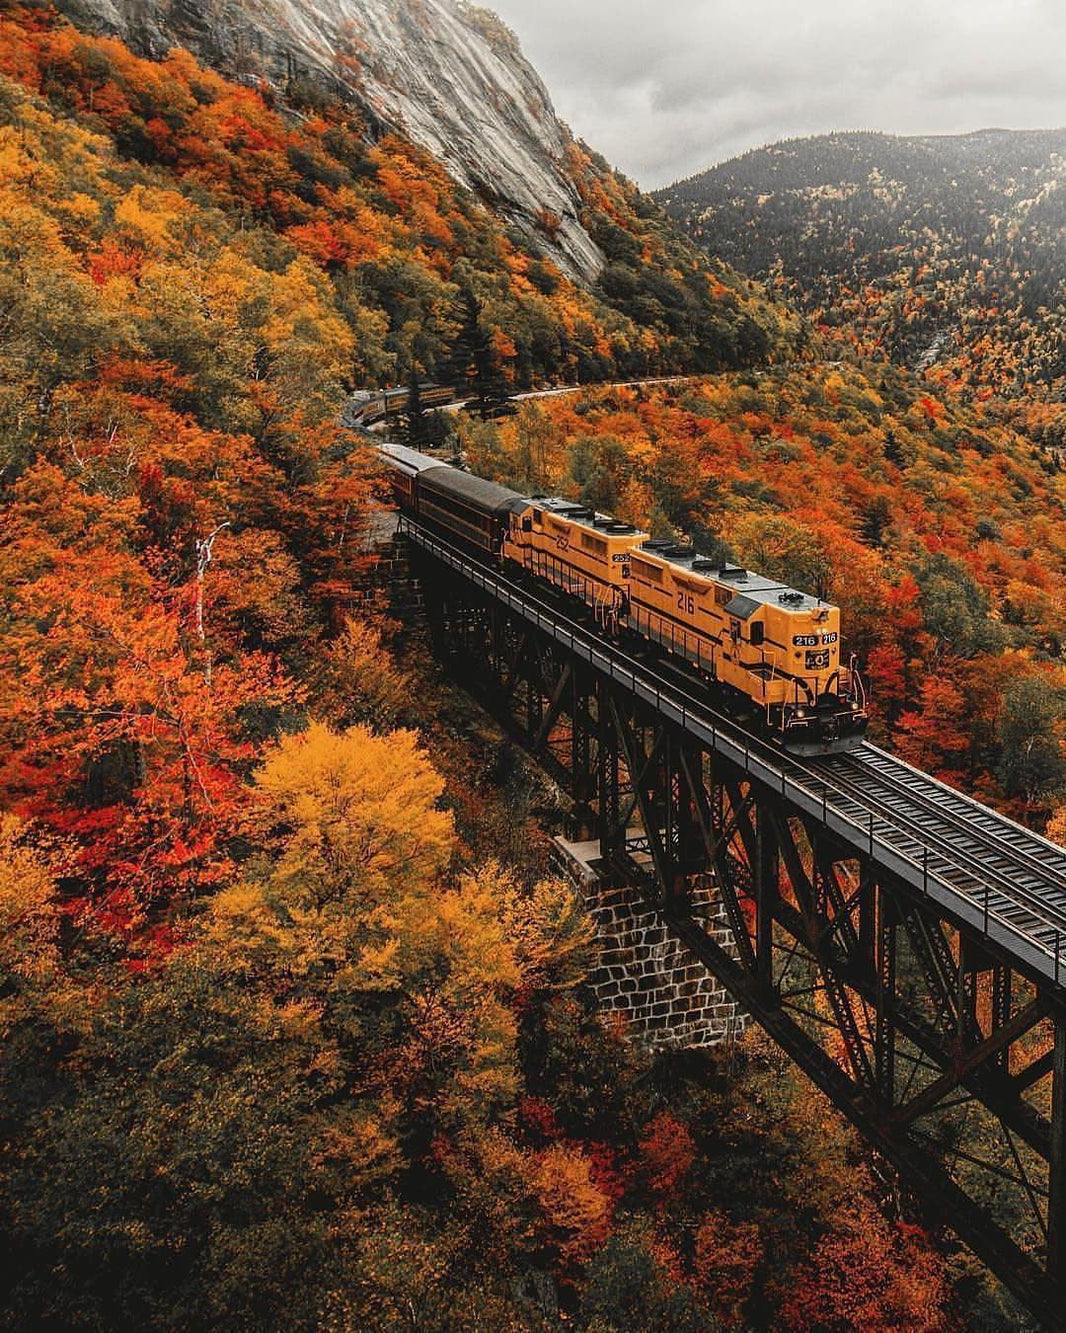 Train in New Hampshire during the autumn